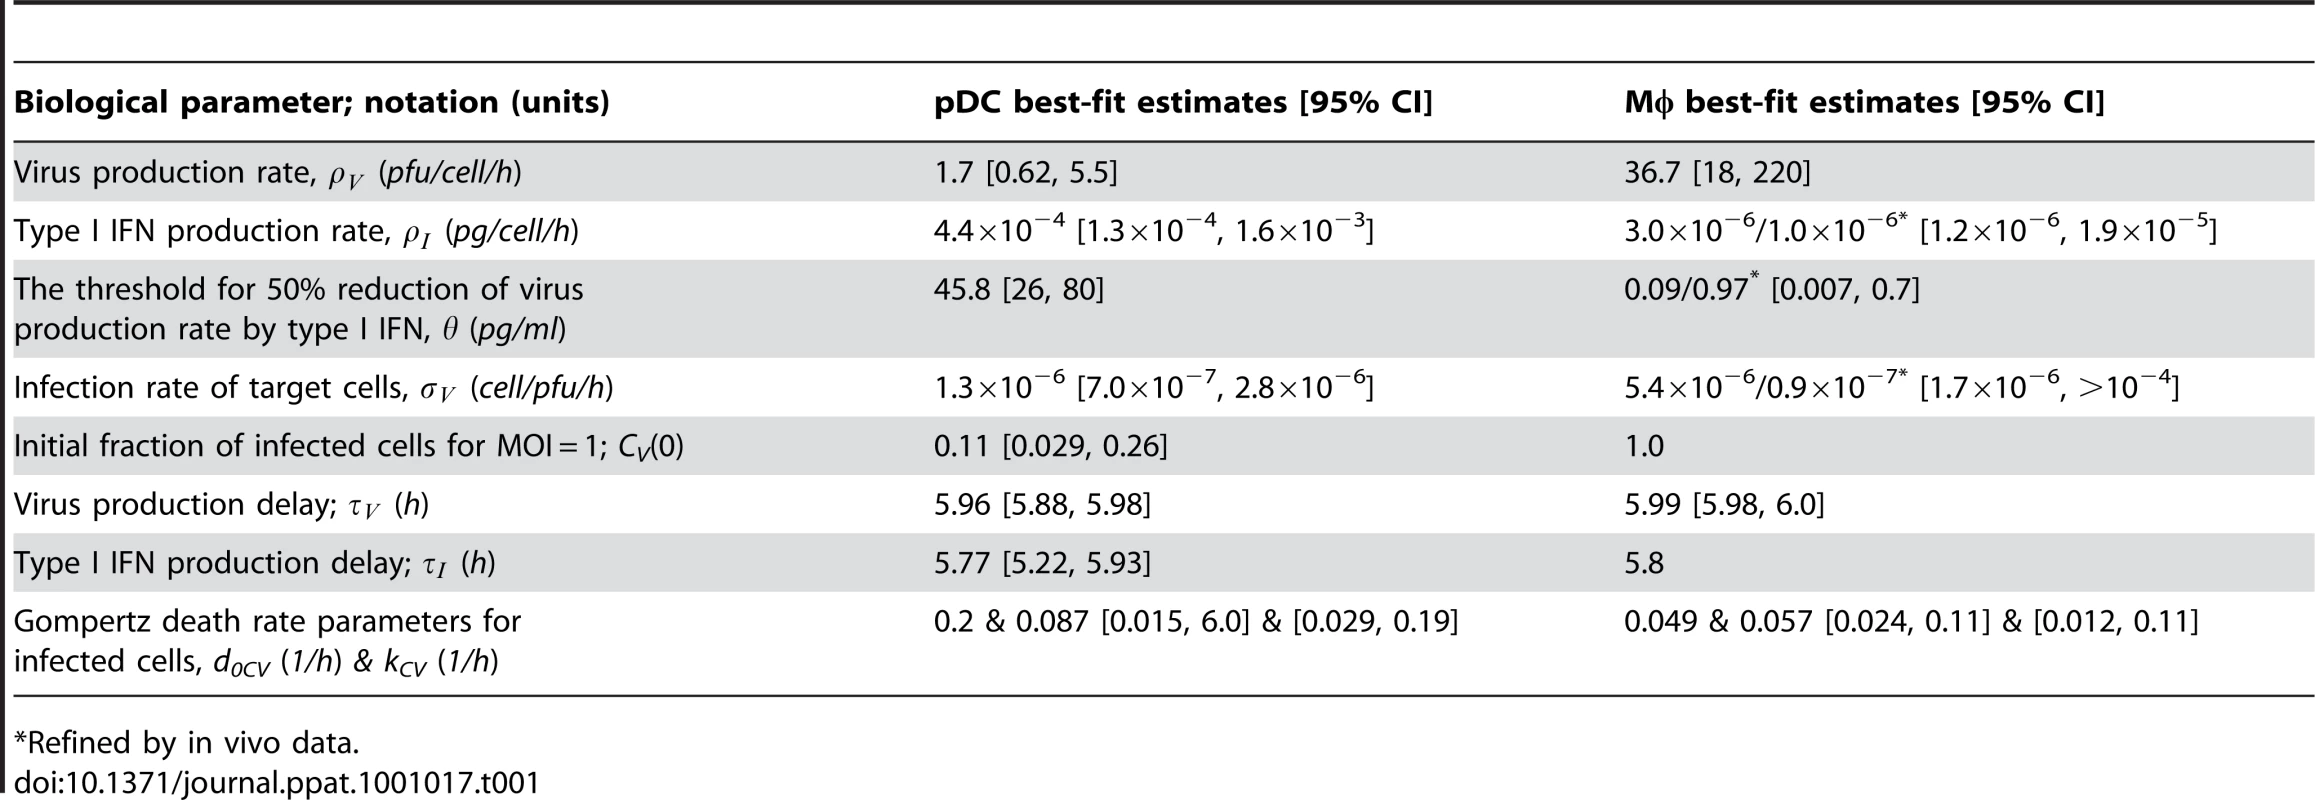 Best-fit parameter values for in vitro and in vivo MHV infection of pDC and Mφ and the corresponding 95% confidence intervals.